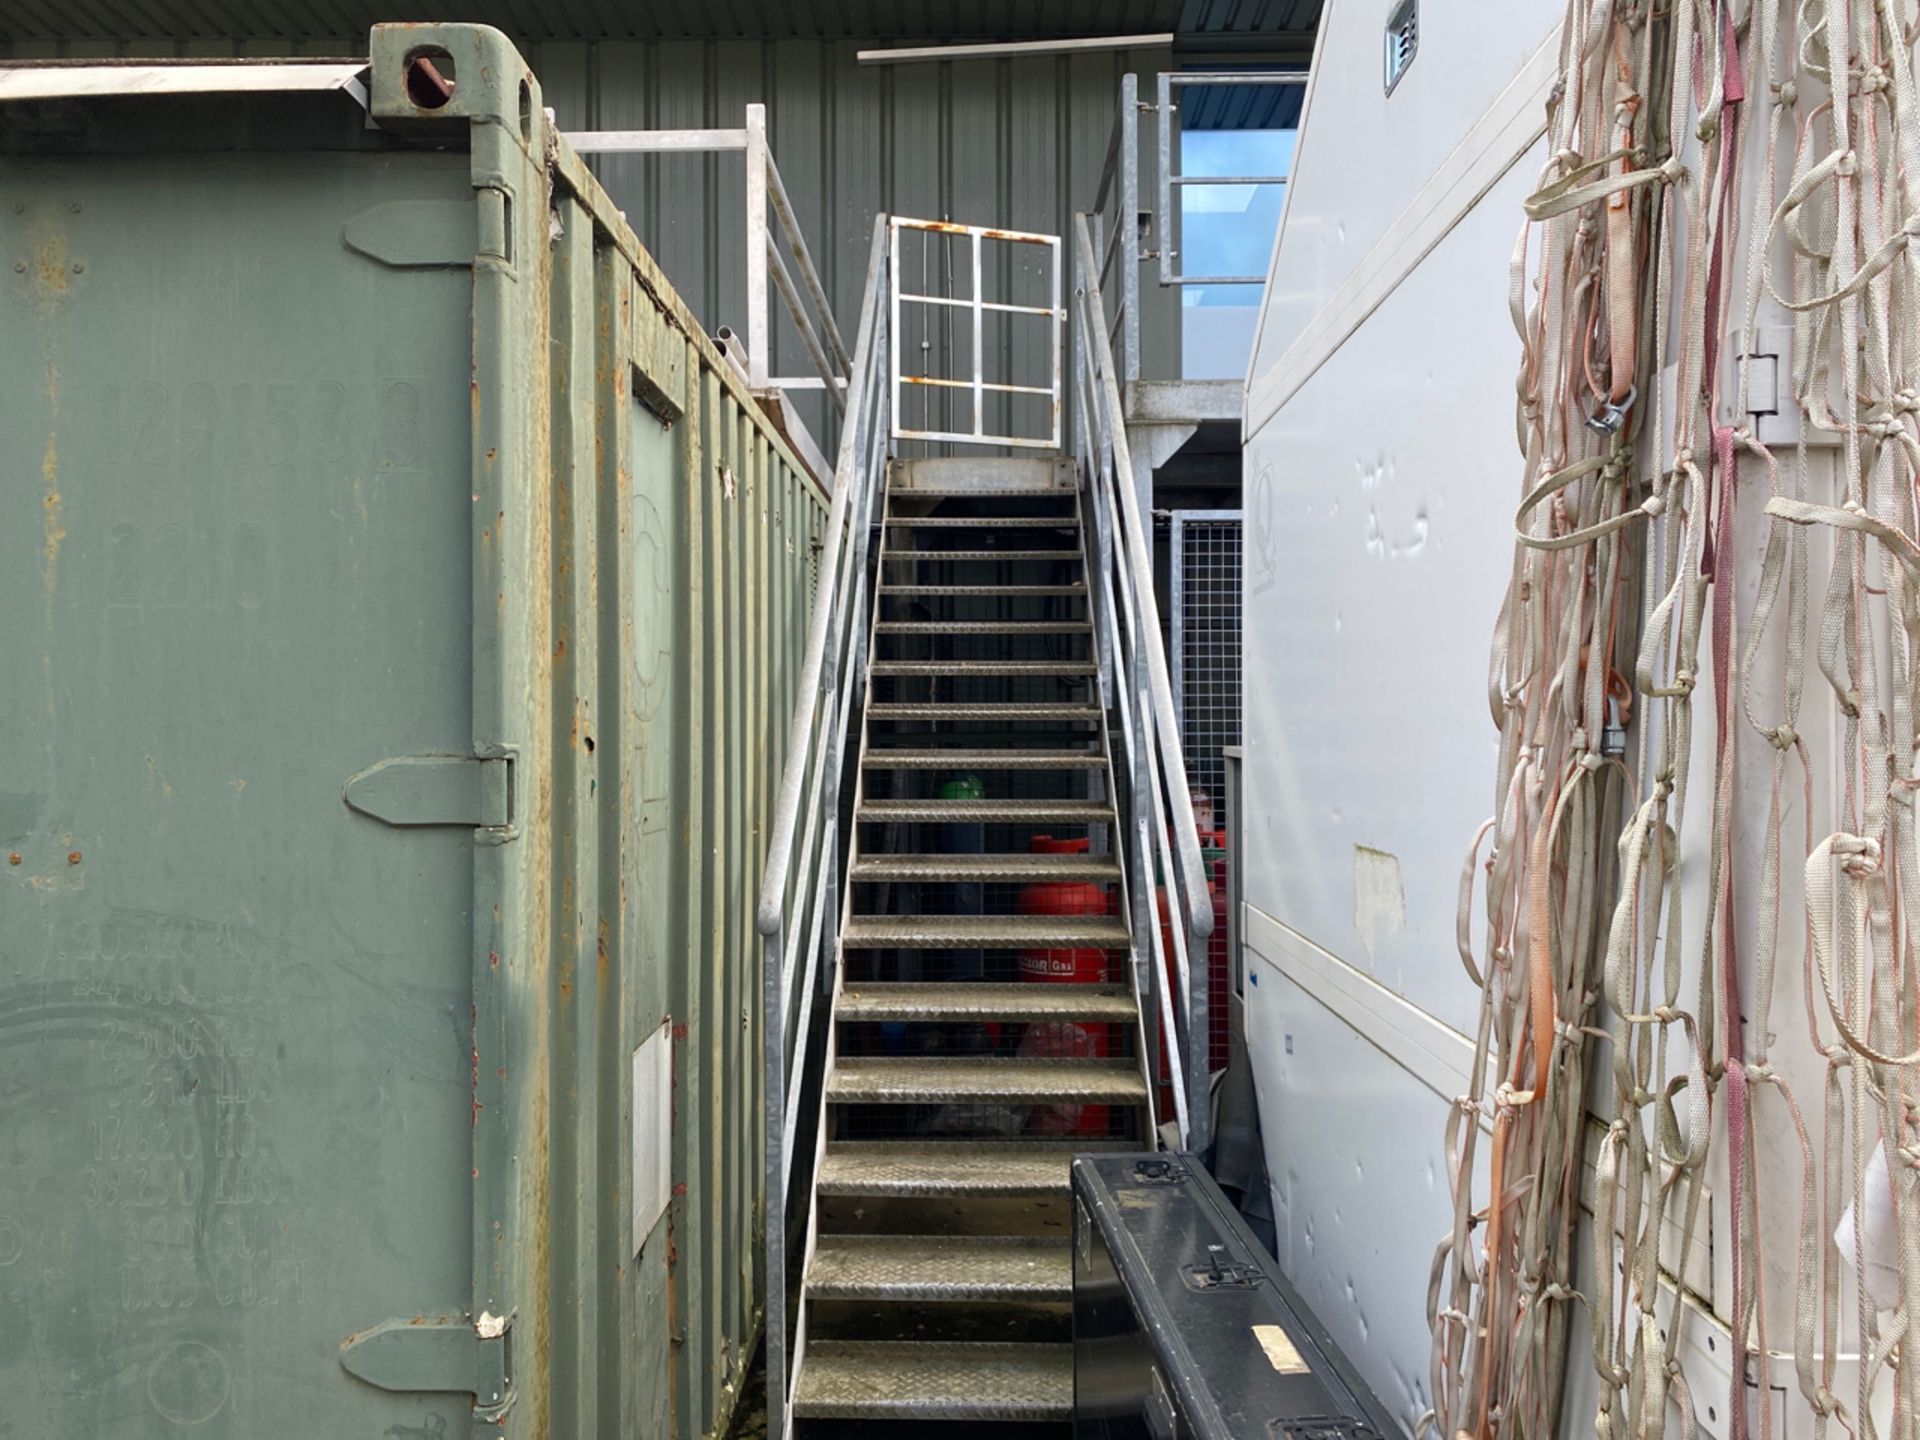 Loading Platform with Staircase - Image 5 of 10